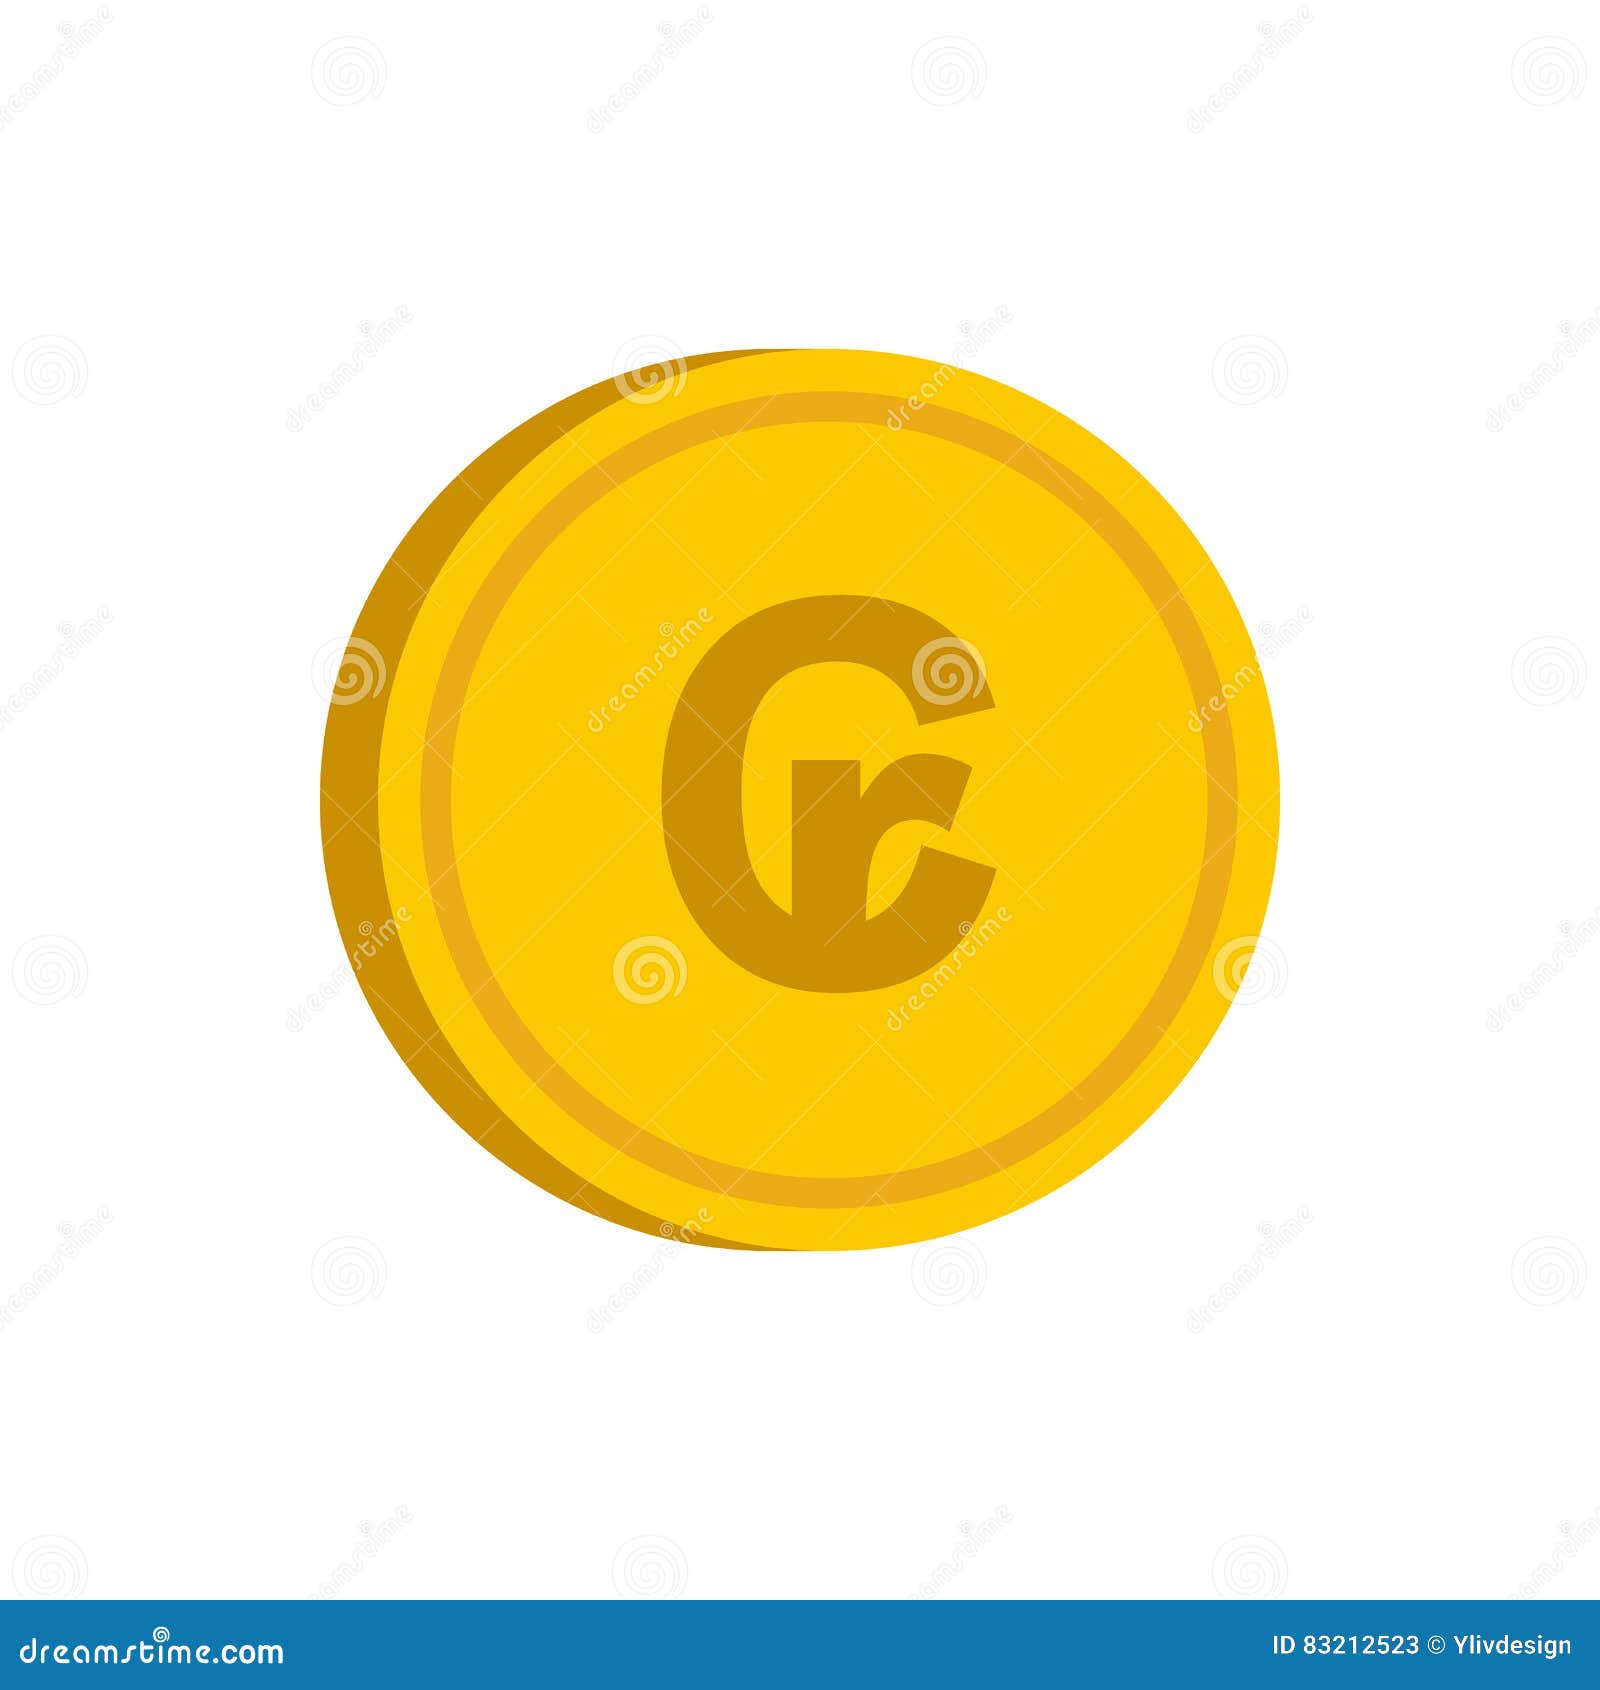 gold coin with cruzeiro sign icon, flat style